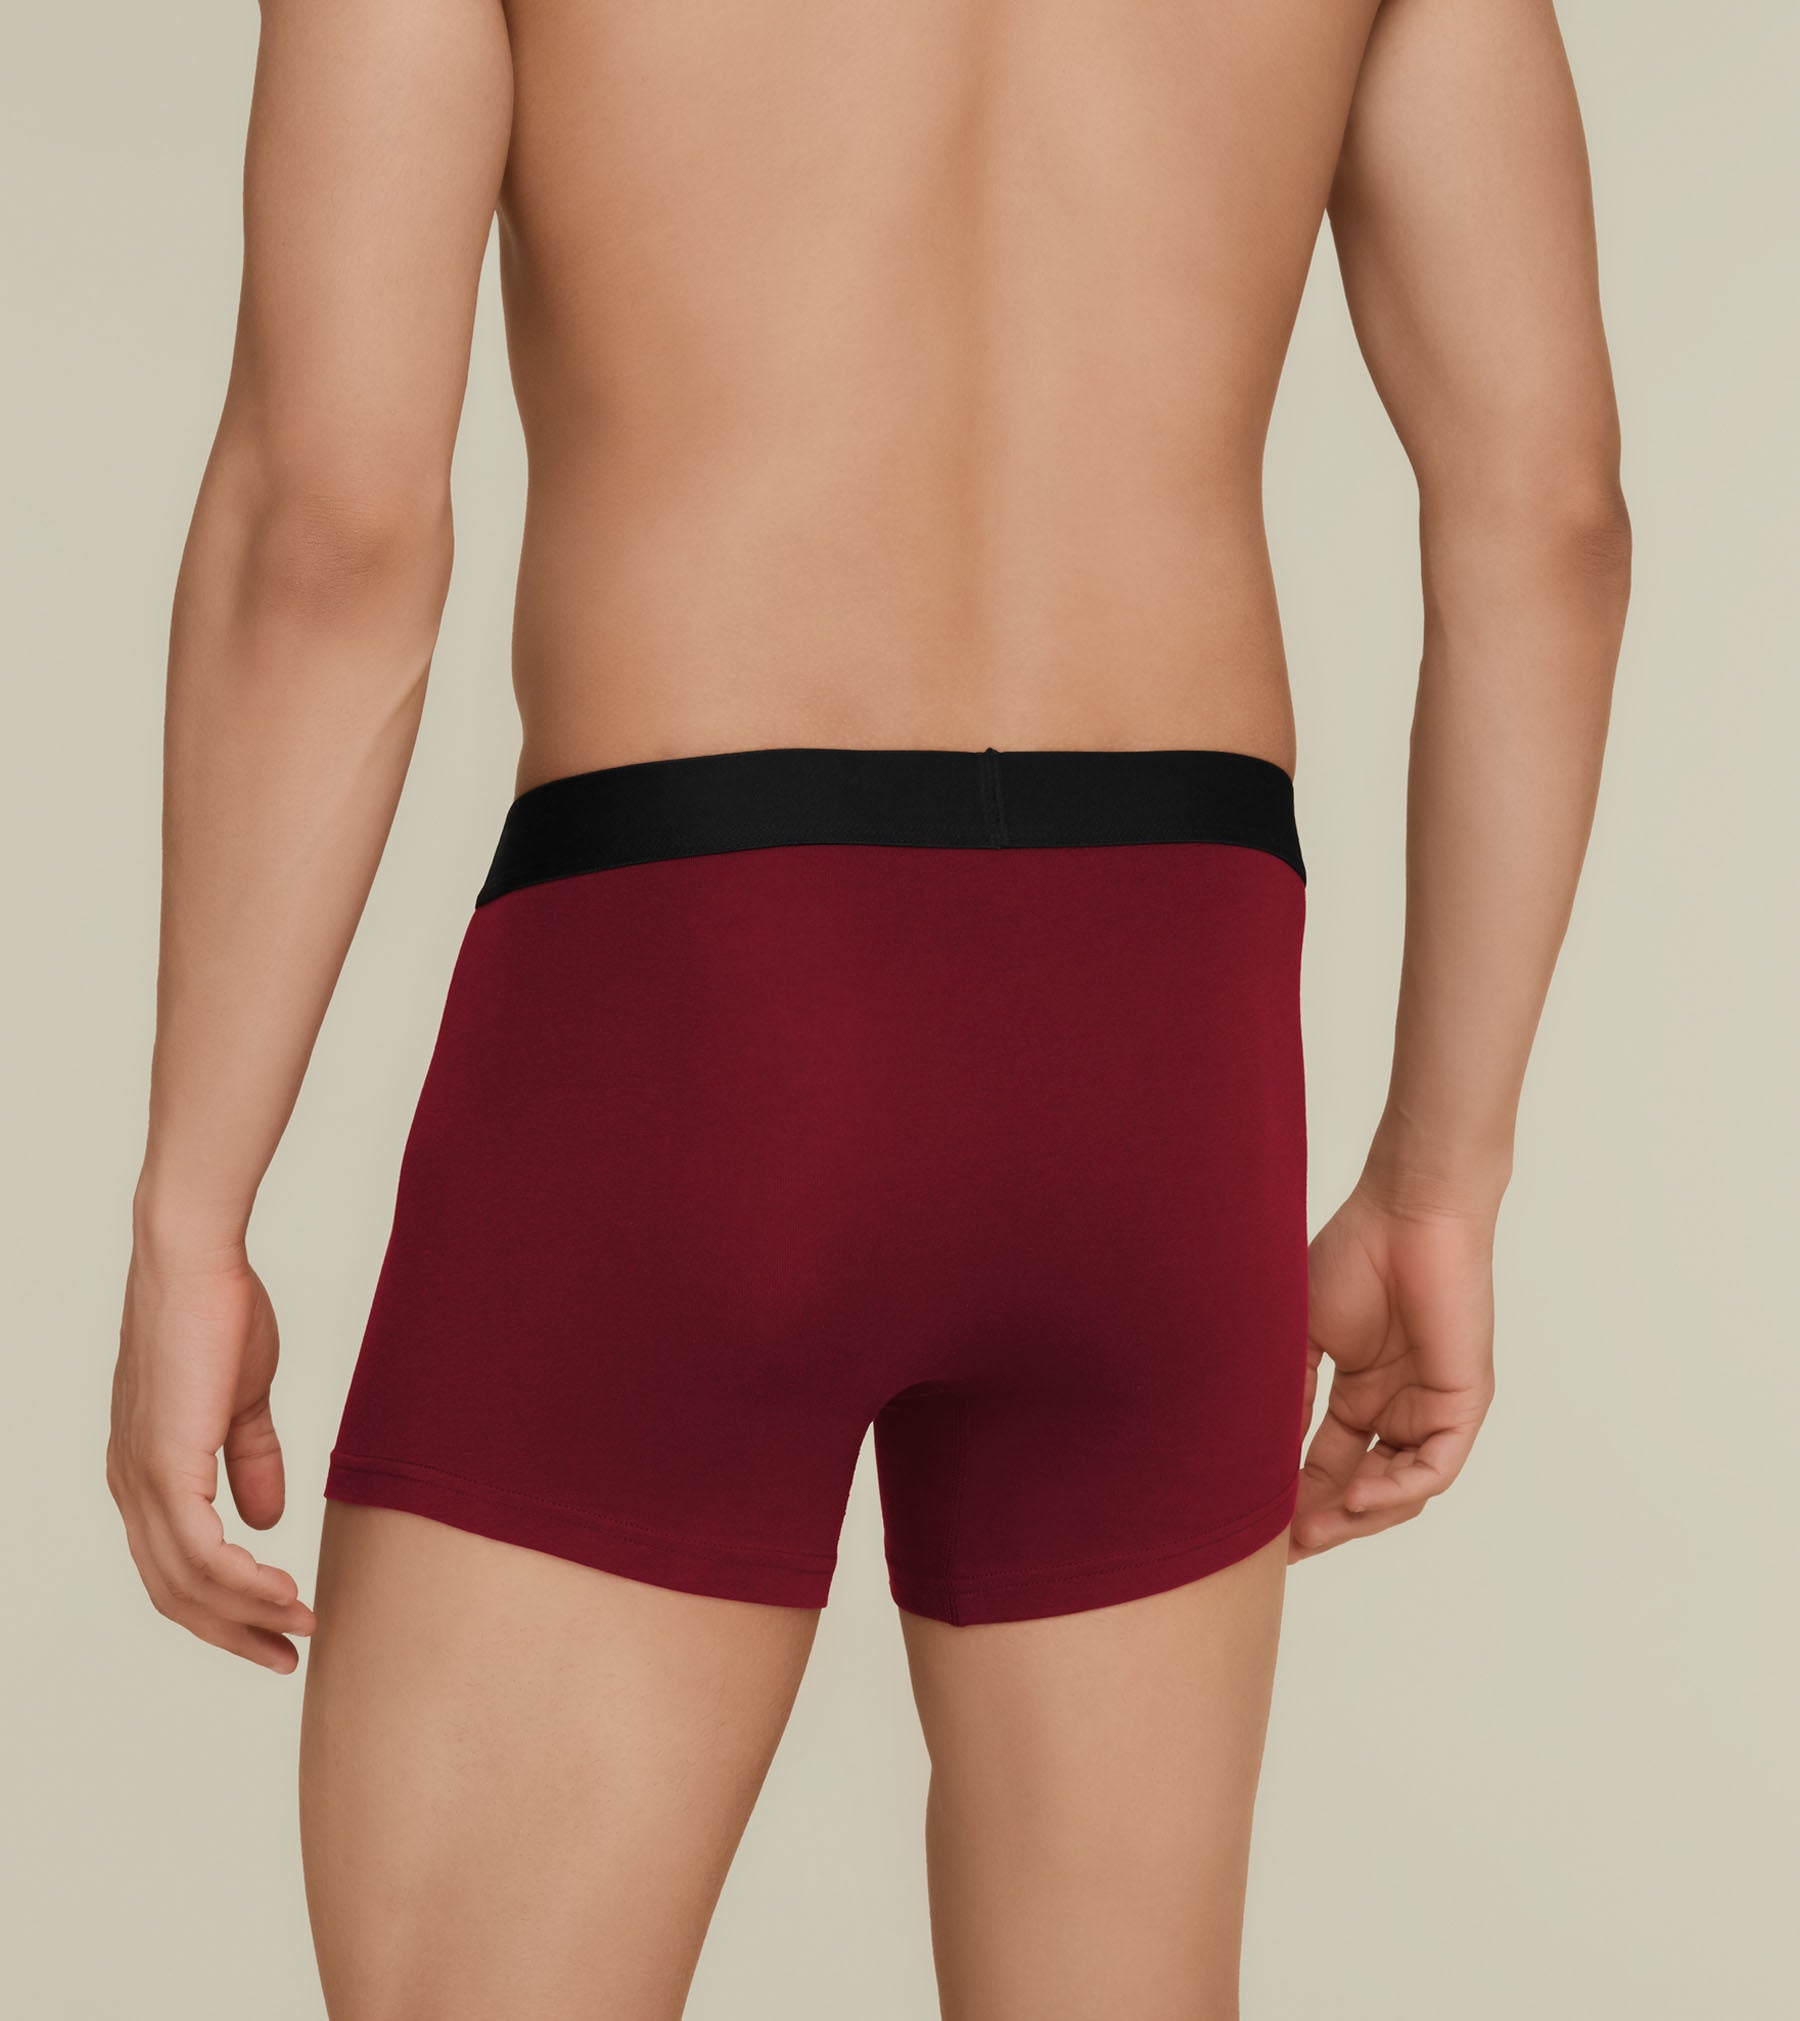 Aero Silver Cotton Trunks For Men Pack of 2(Black, Maroon) -  XYXX Mens Apparels